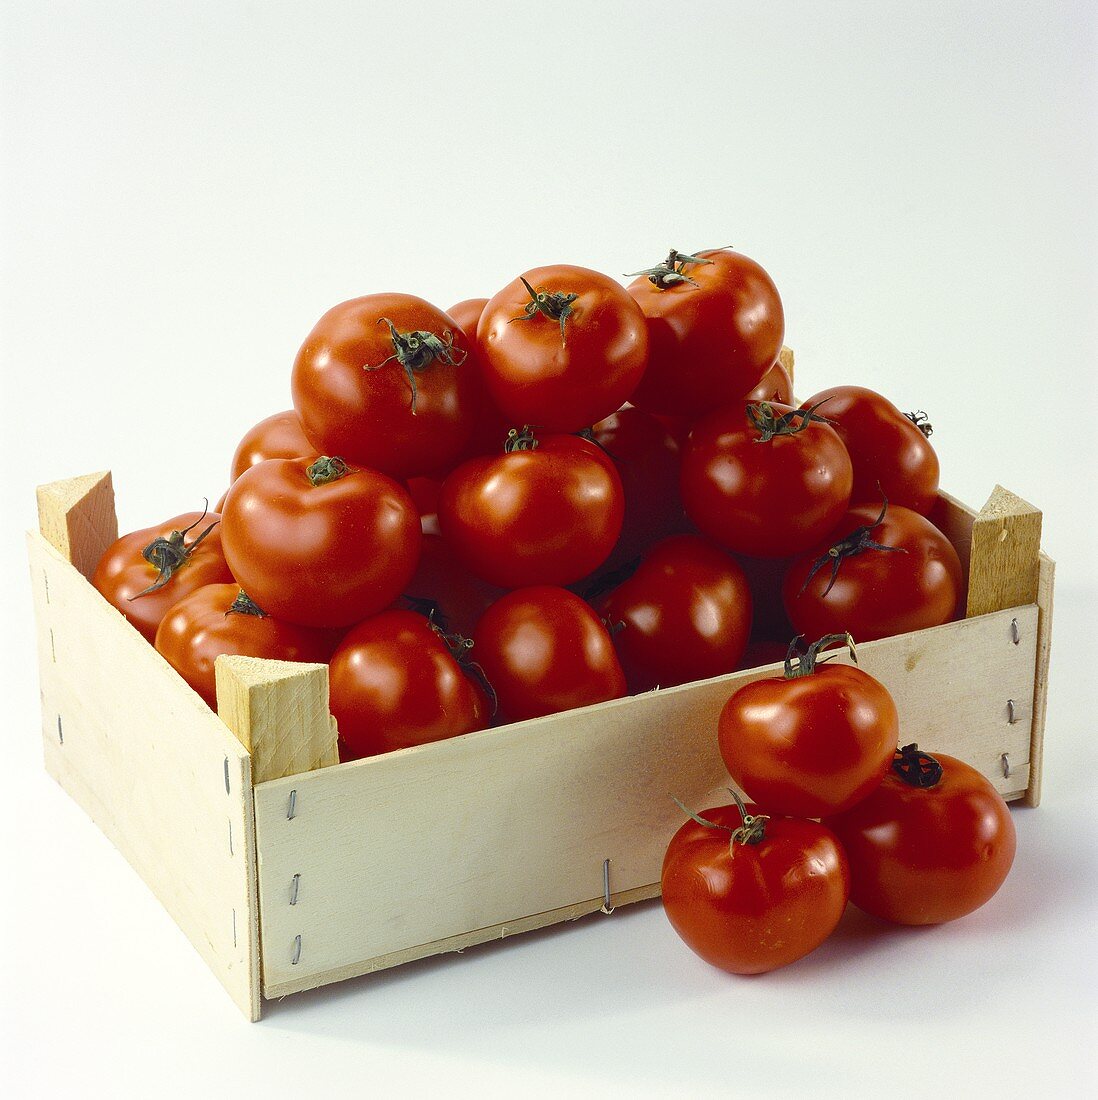 Wooden crate of tomatoes